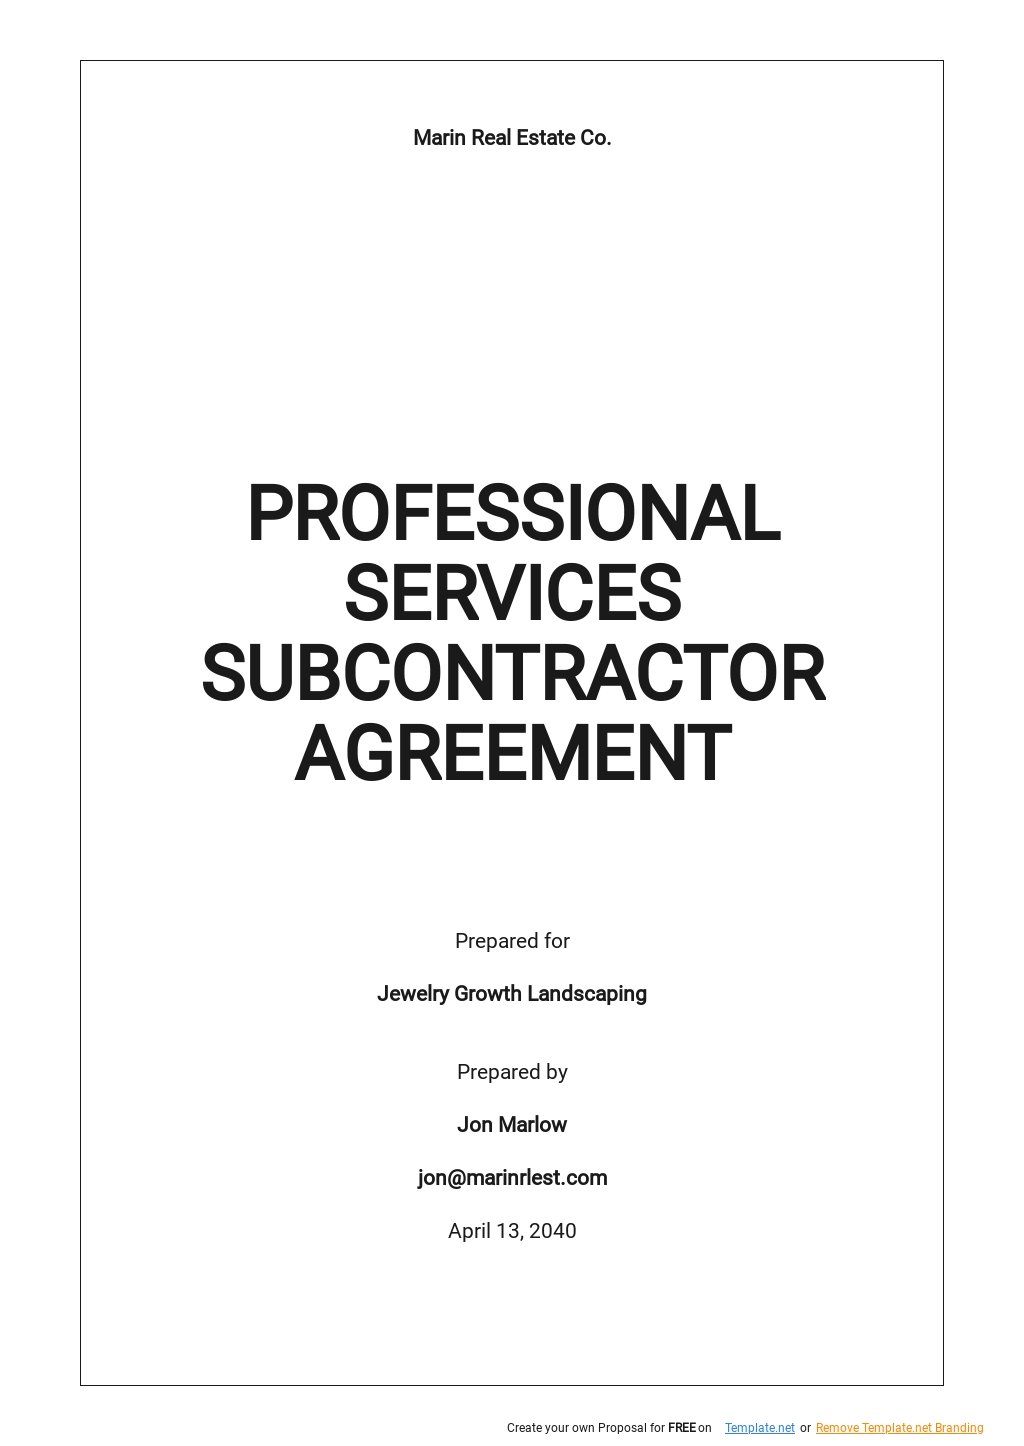 Professional Services Subcontractor Agreement Template.jpe